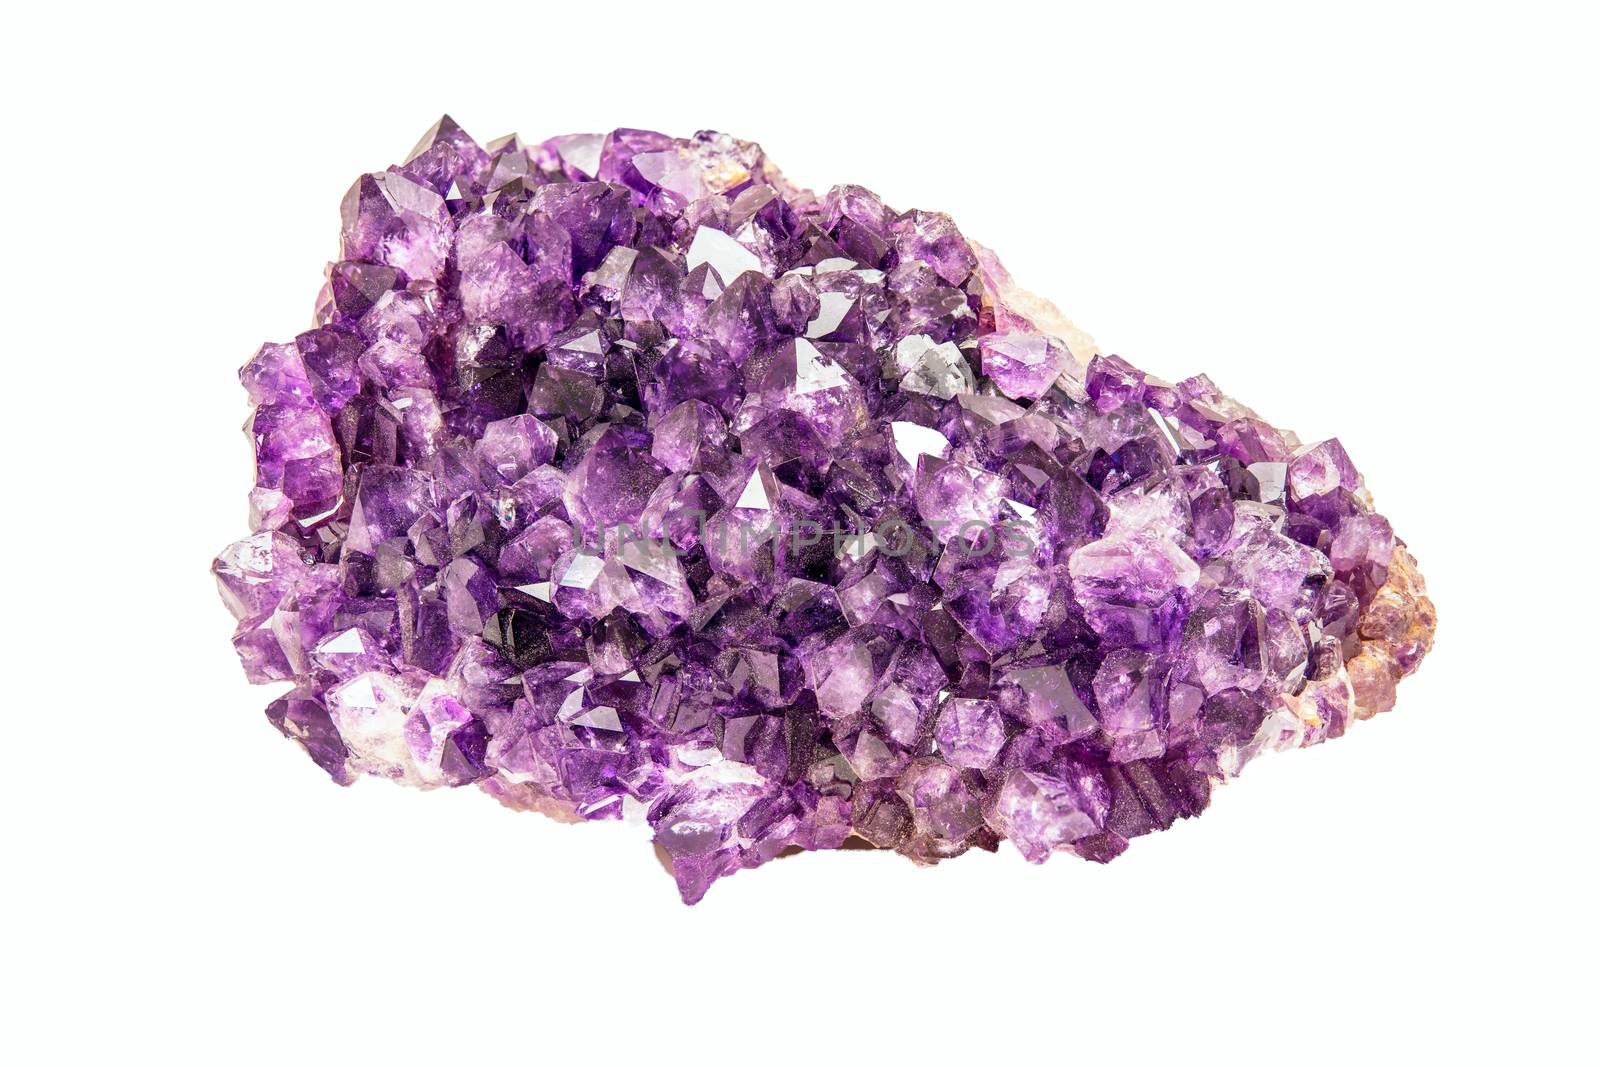 Natural amethyst geode on white background